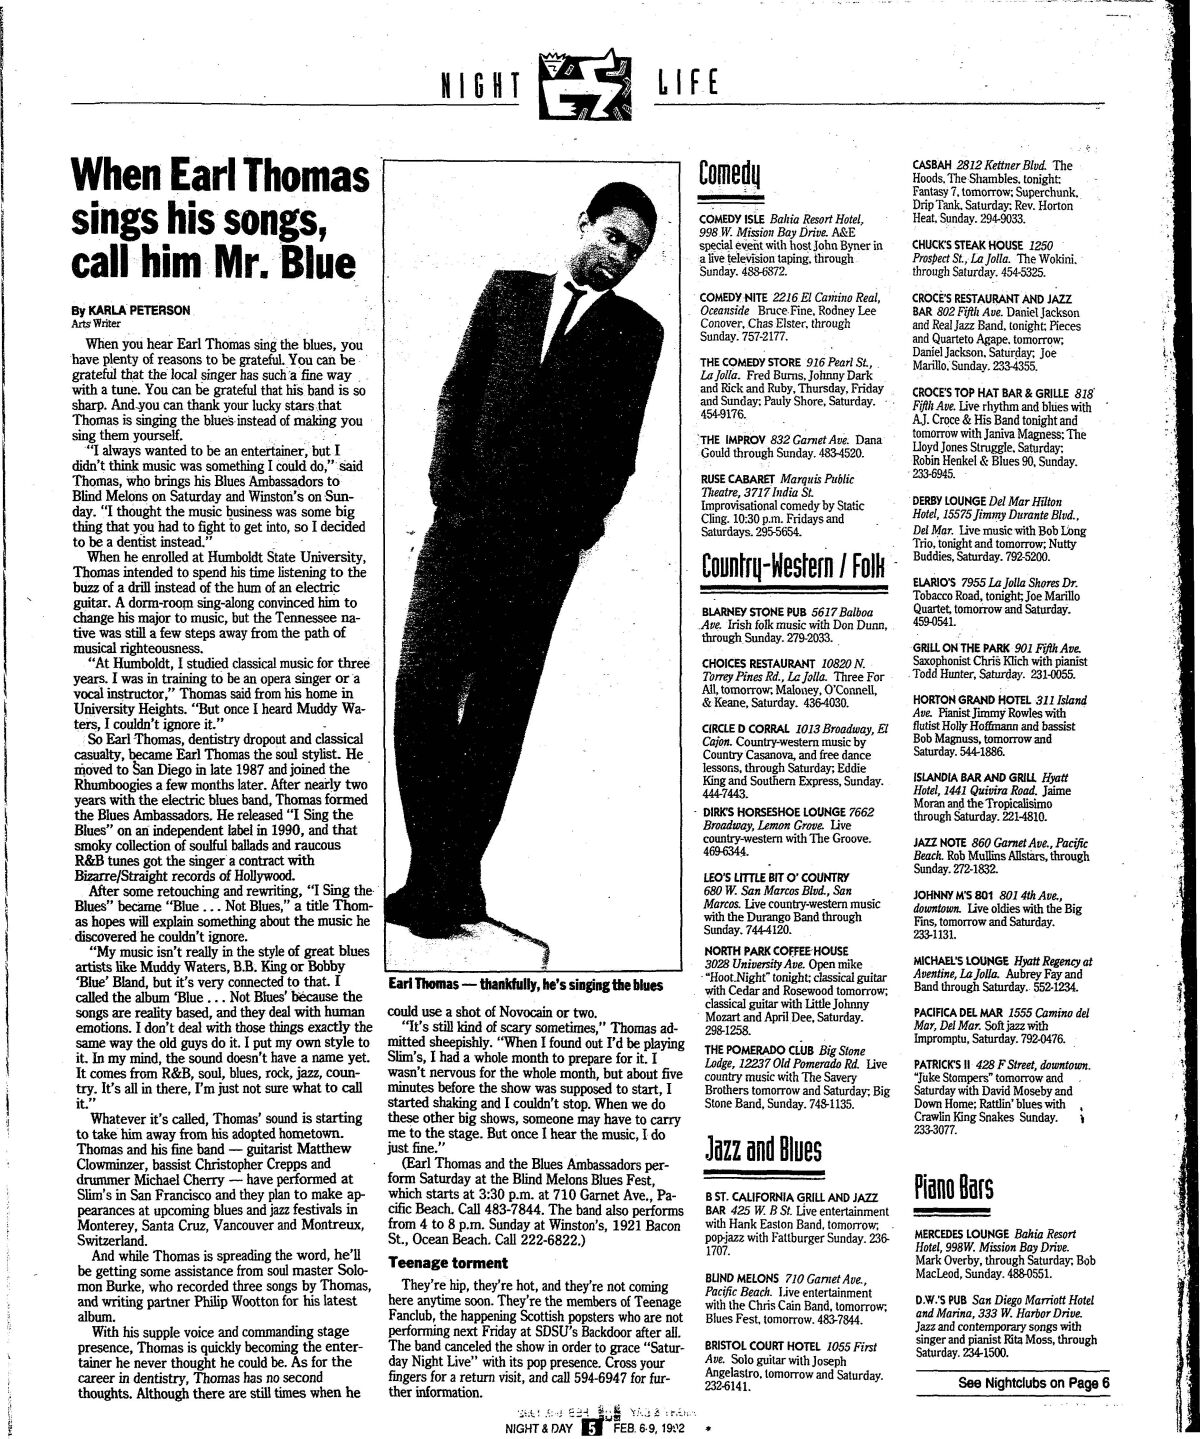 Karla Peterson's interview with blues singer Earl Thomas in the Feb. 6, 1992 Night & Day section.